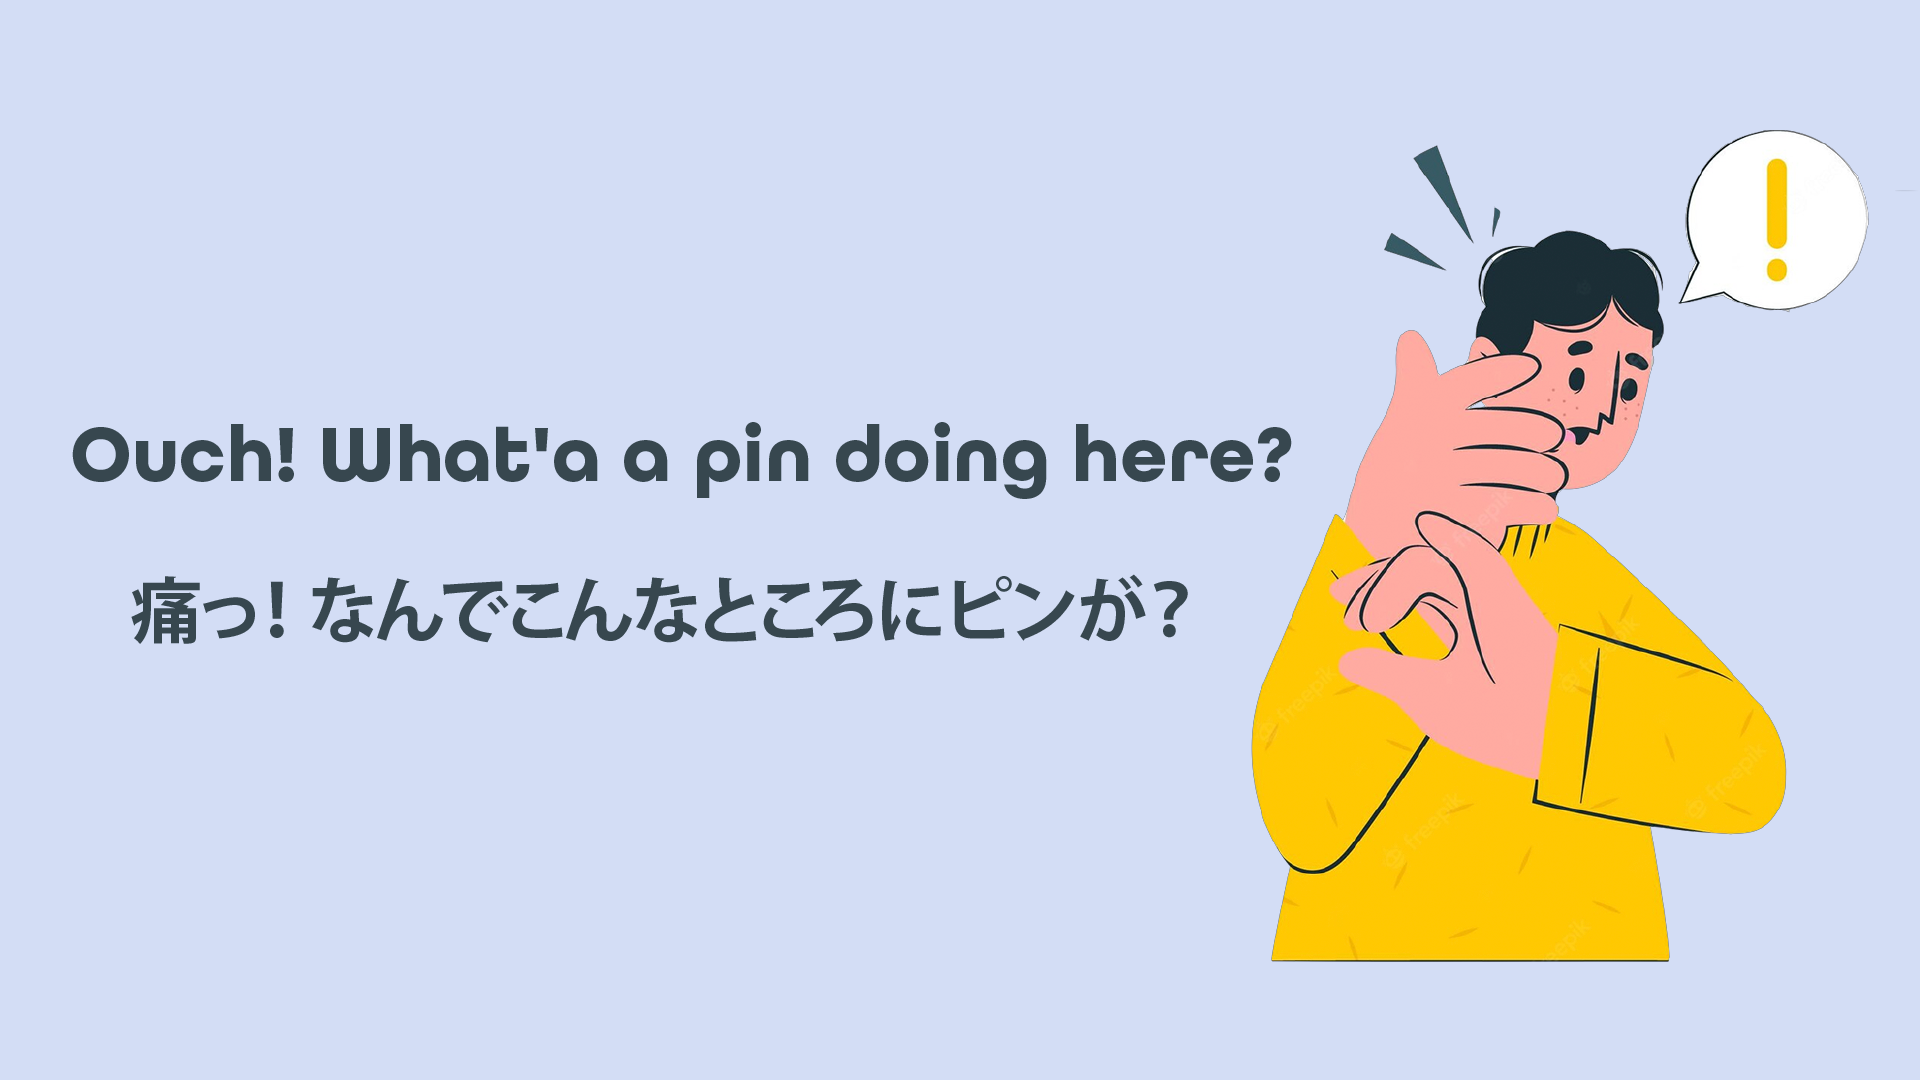 Featured image for “Ouch! What’a a pin doing here? 痛っ！なんでこんなところにピンが？”